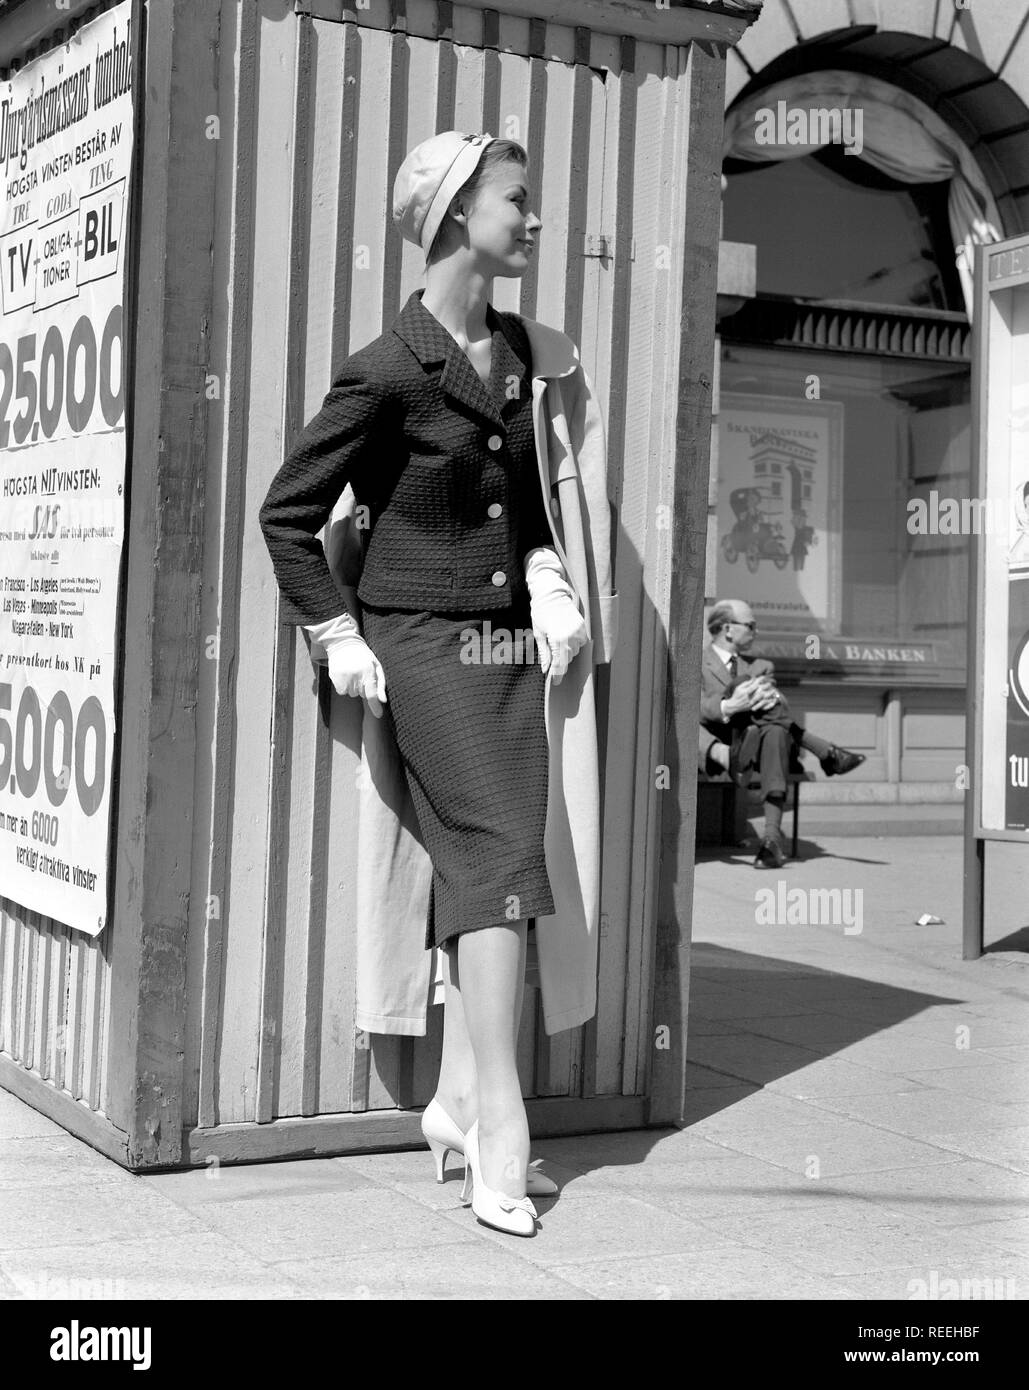 Fashionable in the 1950s. A young woman wears a typical 1950s two piece dress with matching skirt and jacket. Sweden 1950s. Photo Kristoffersson Ref 315A-1 Stock Photo